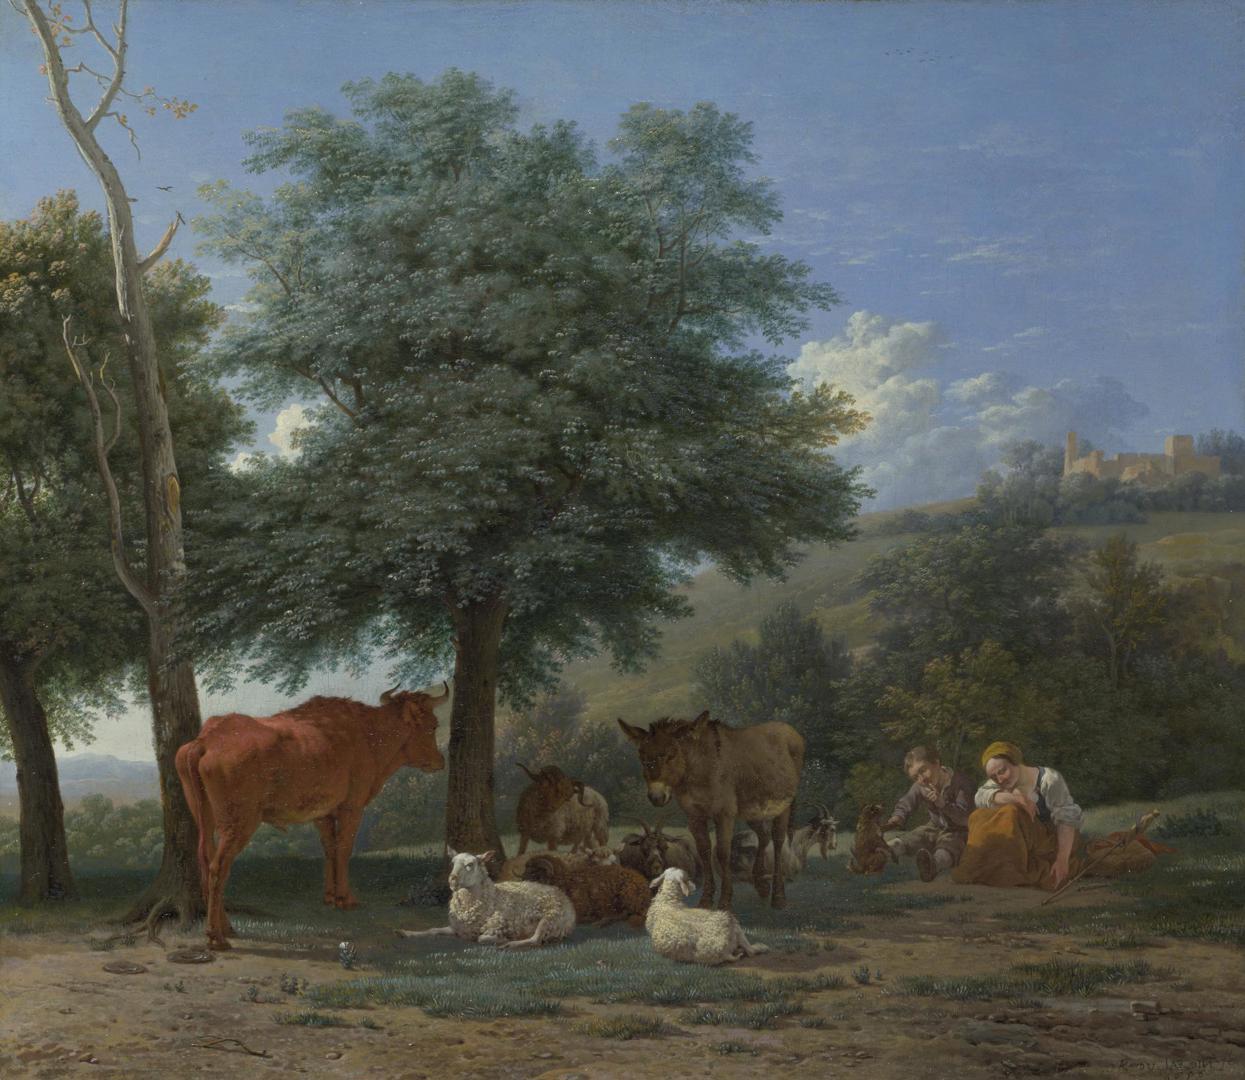 Farm Animals with a Boy and Herdswoman by Karel Dujardin